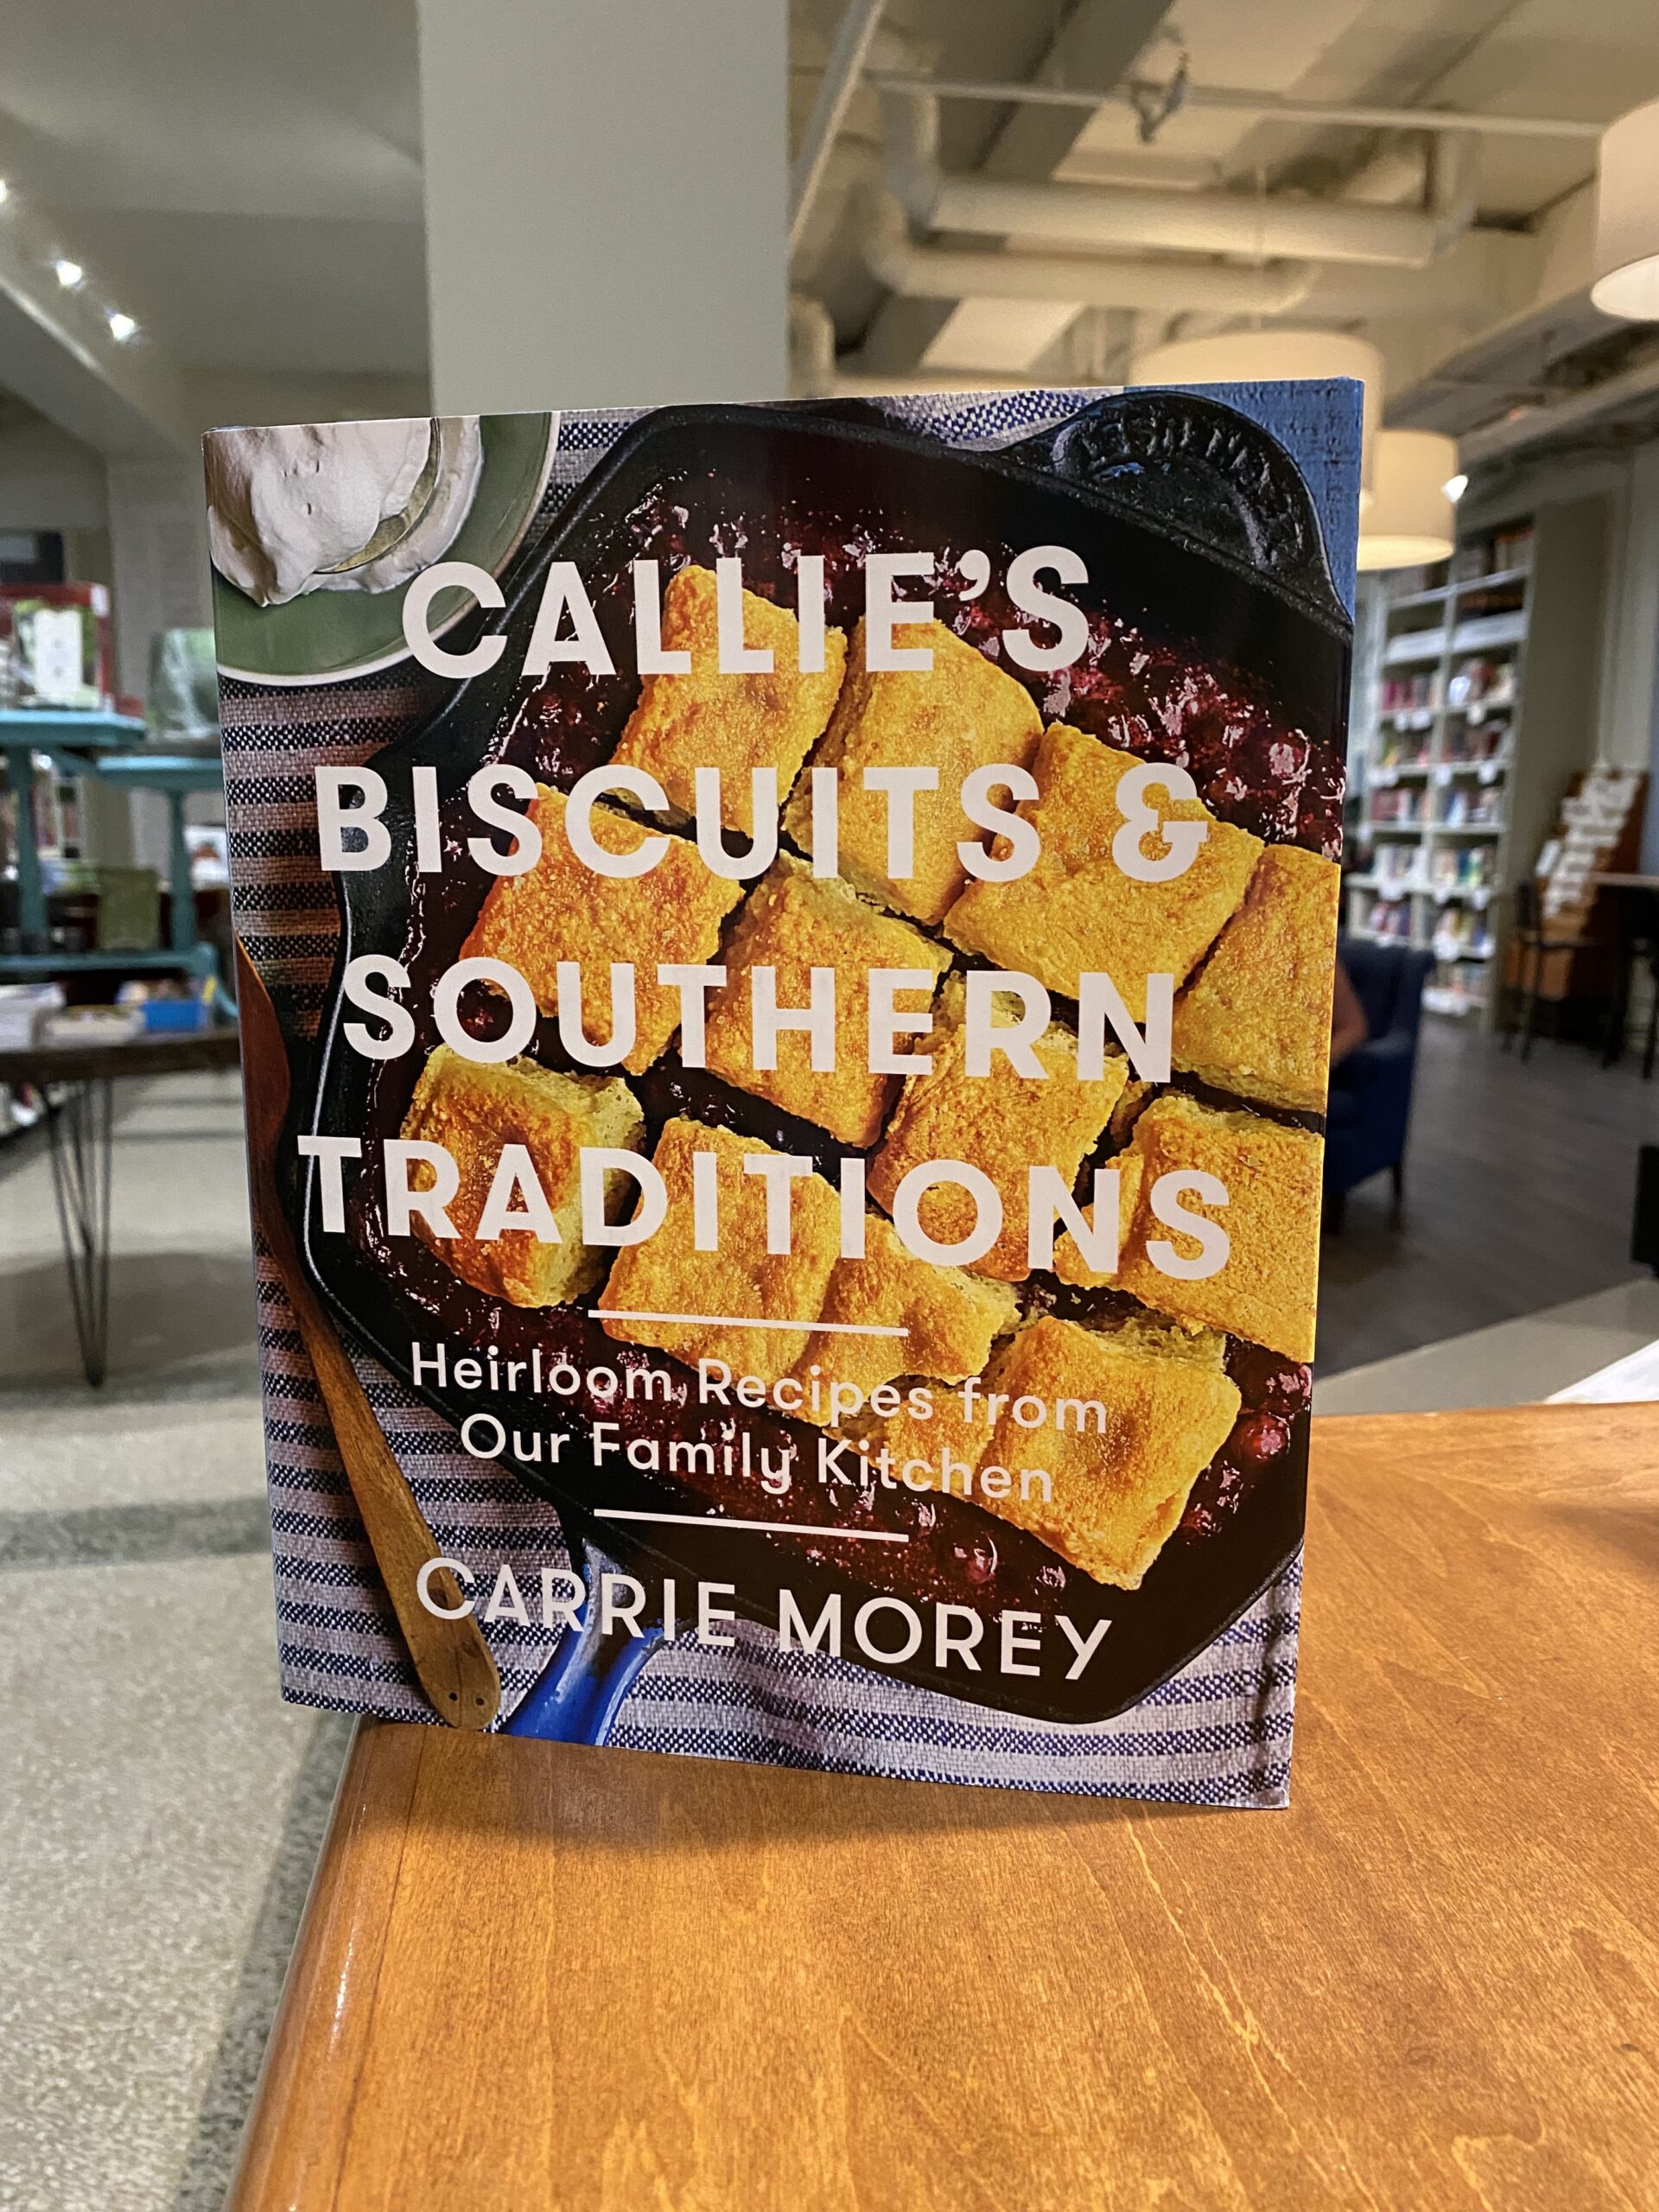 Callie's Biscuits & Southern Traditions - Carrie Morey